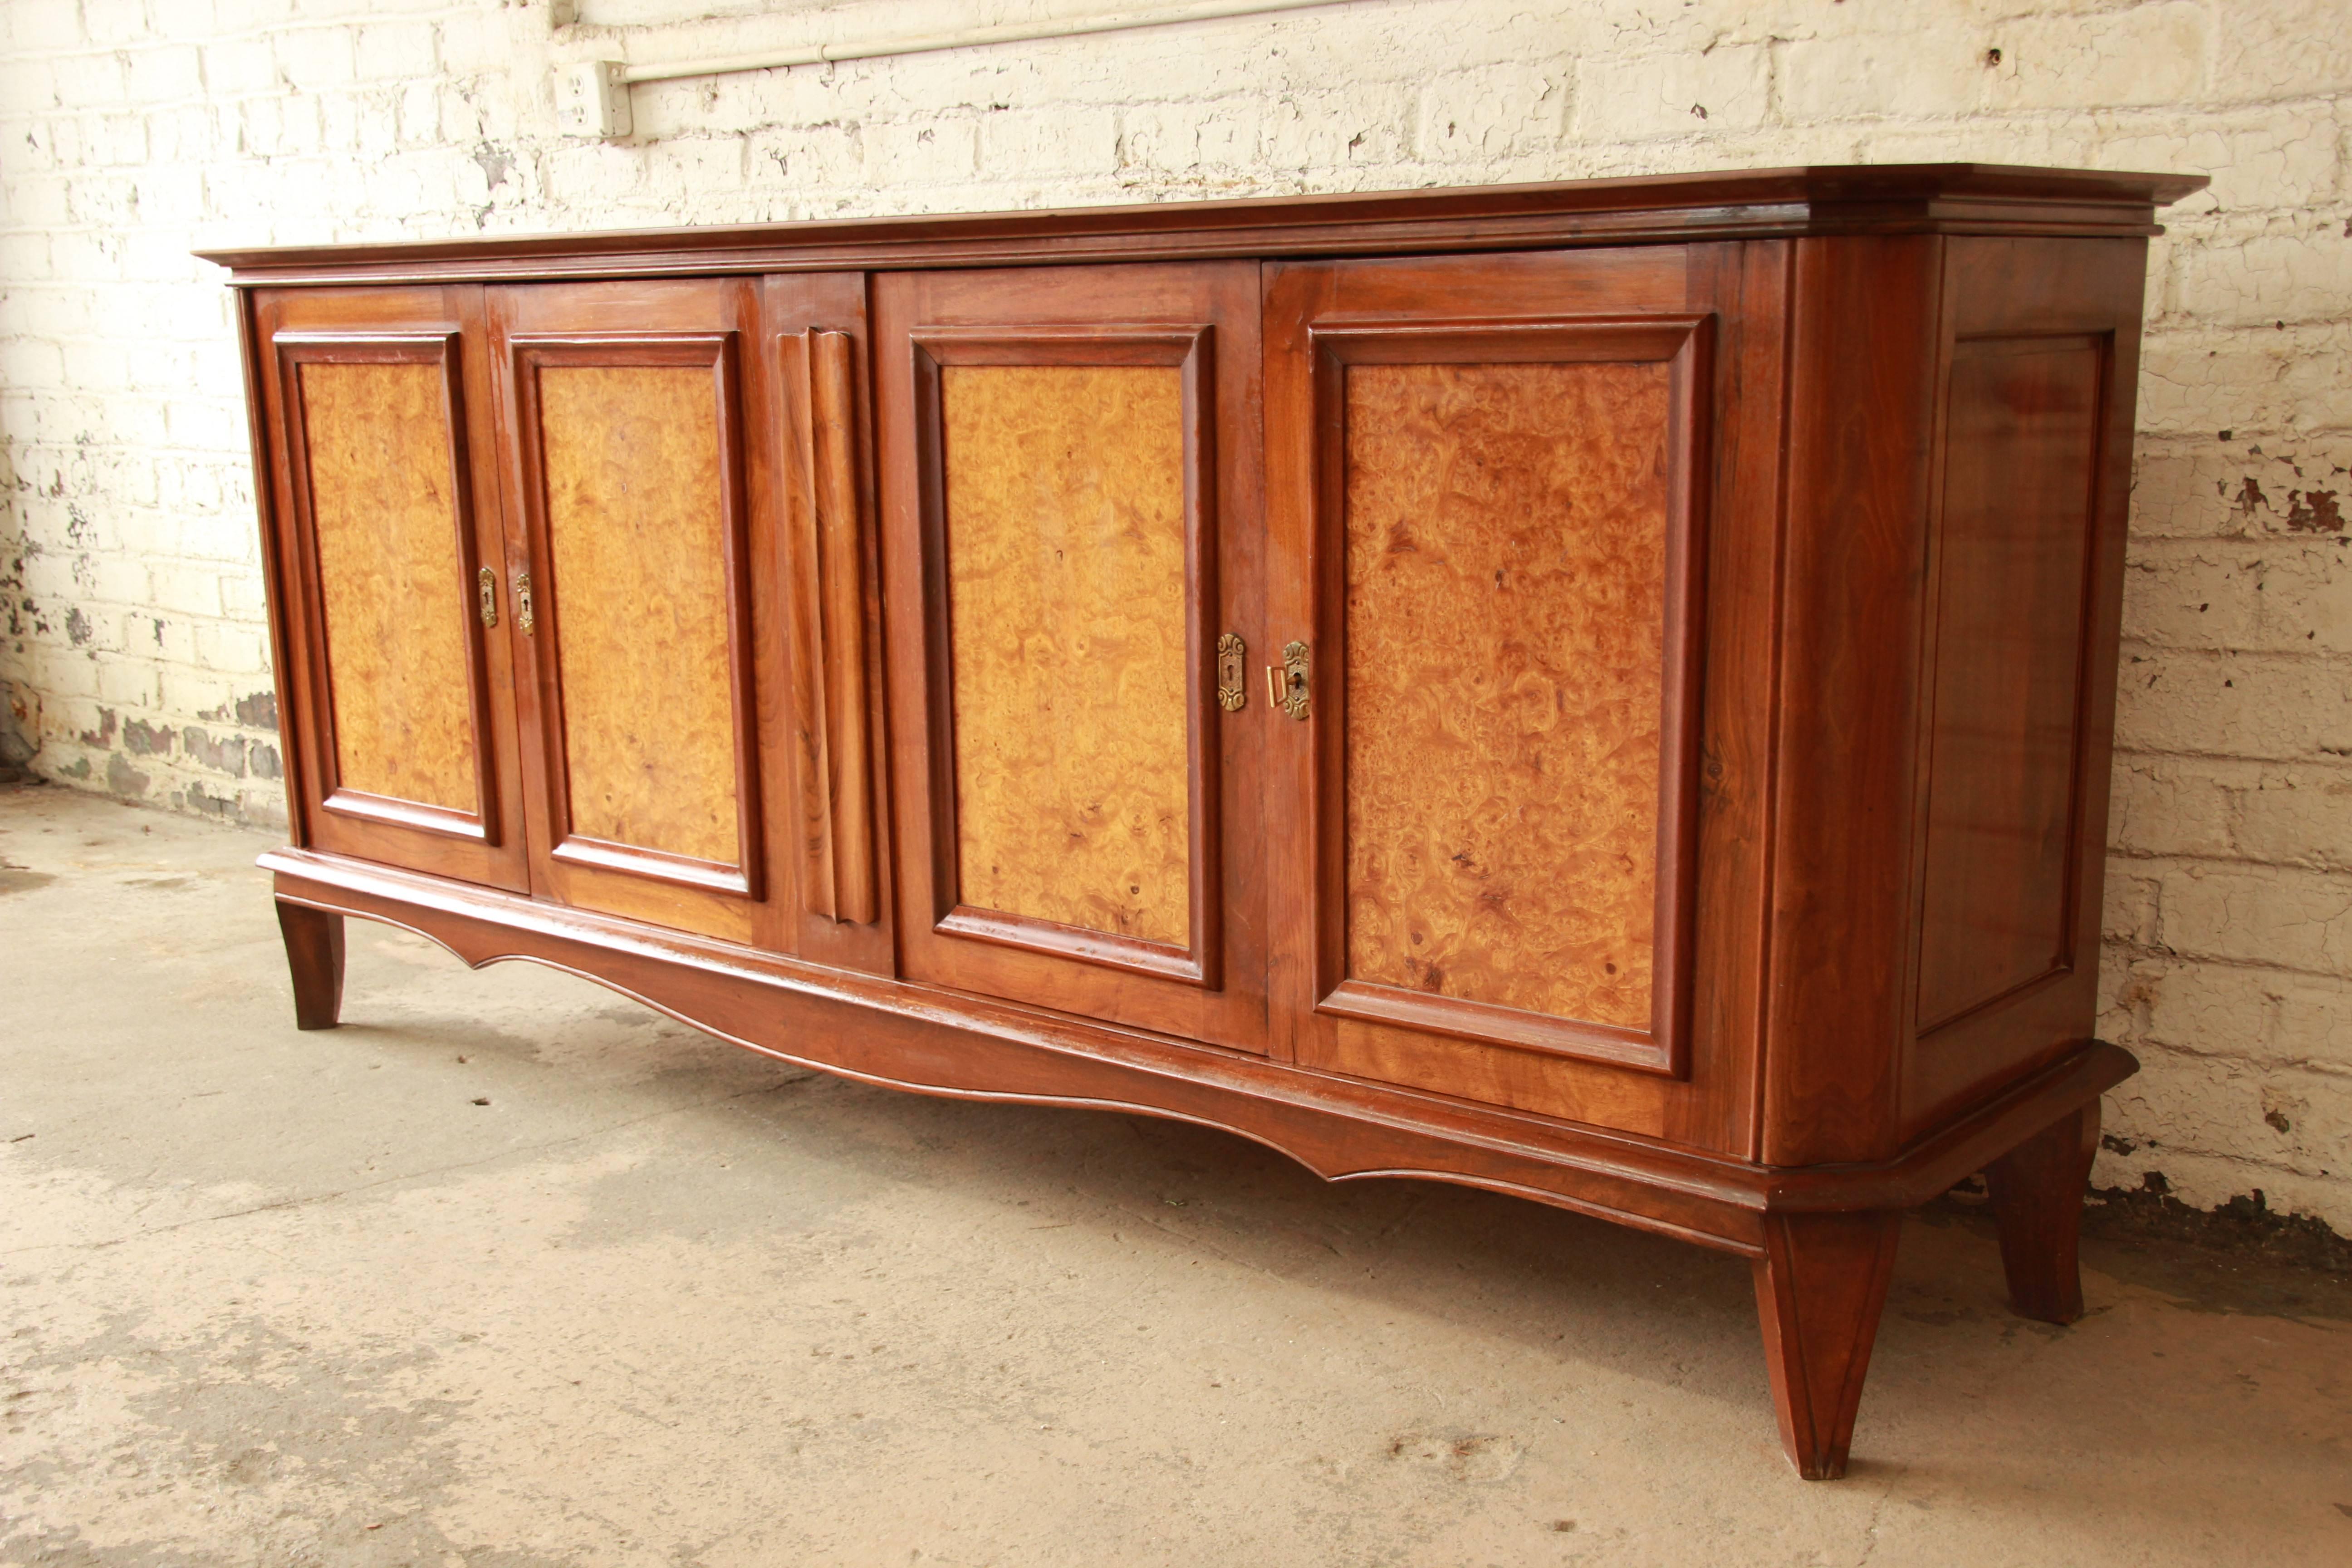 Offering an exceptional 1940s French sideboard or buffet. This monumental piece features beautiful burled maple doors, solid wood construction, and an inlaid diamond design on the top. It offers ample room for storage, with two dovetailed drawers